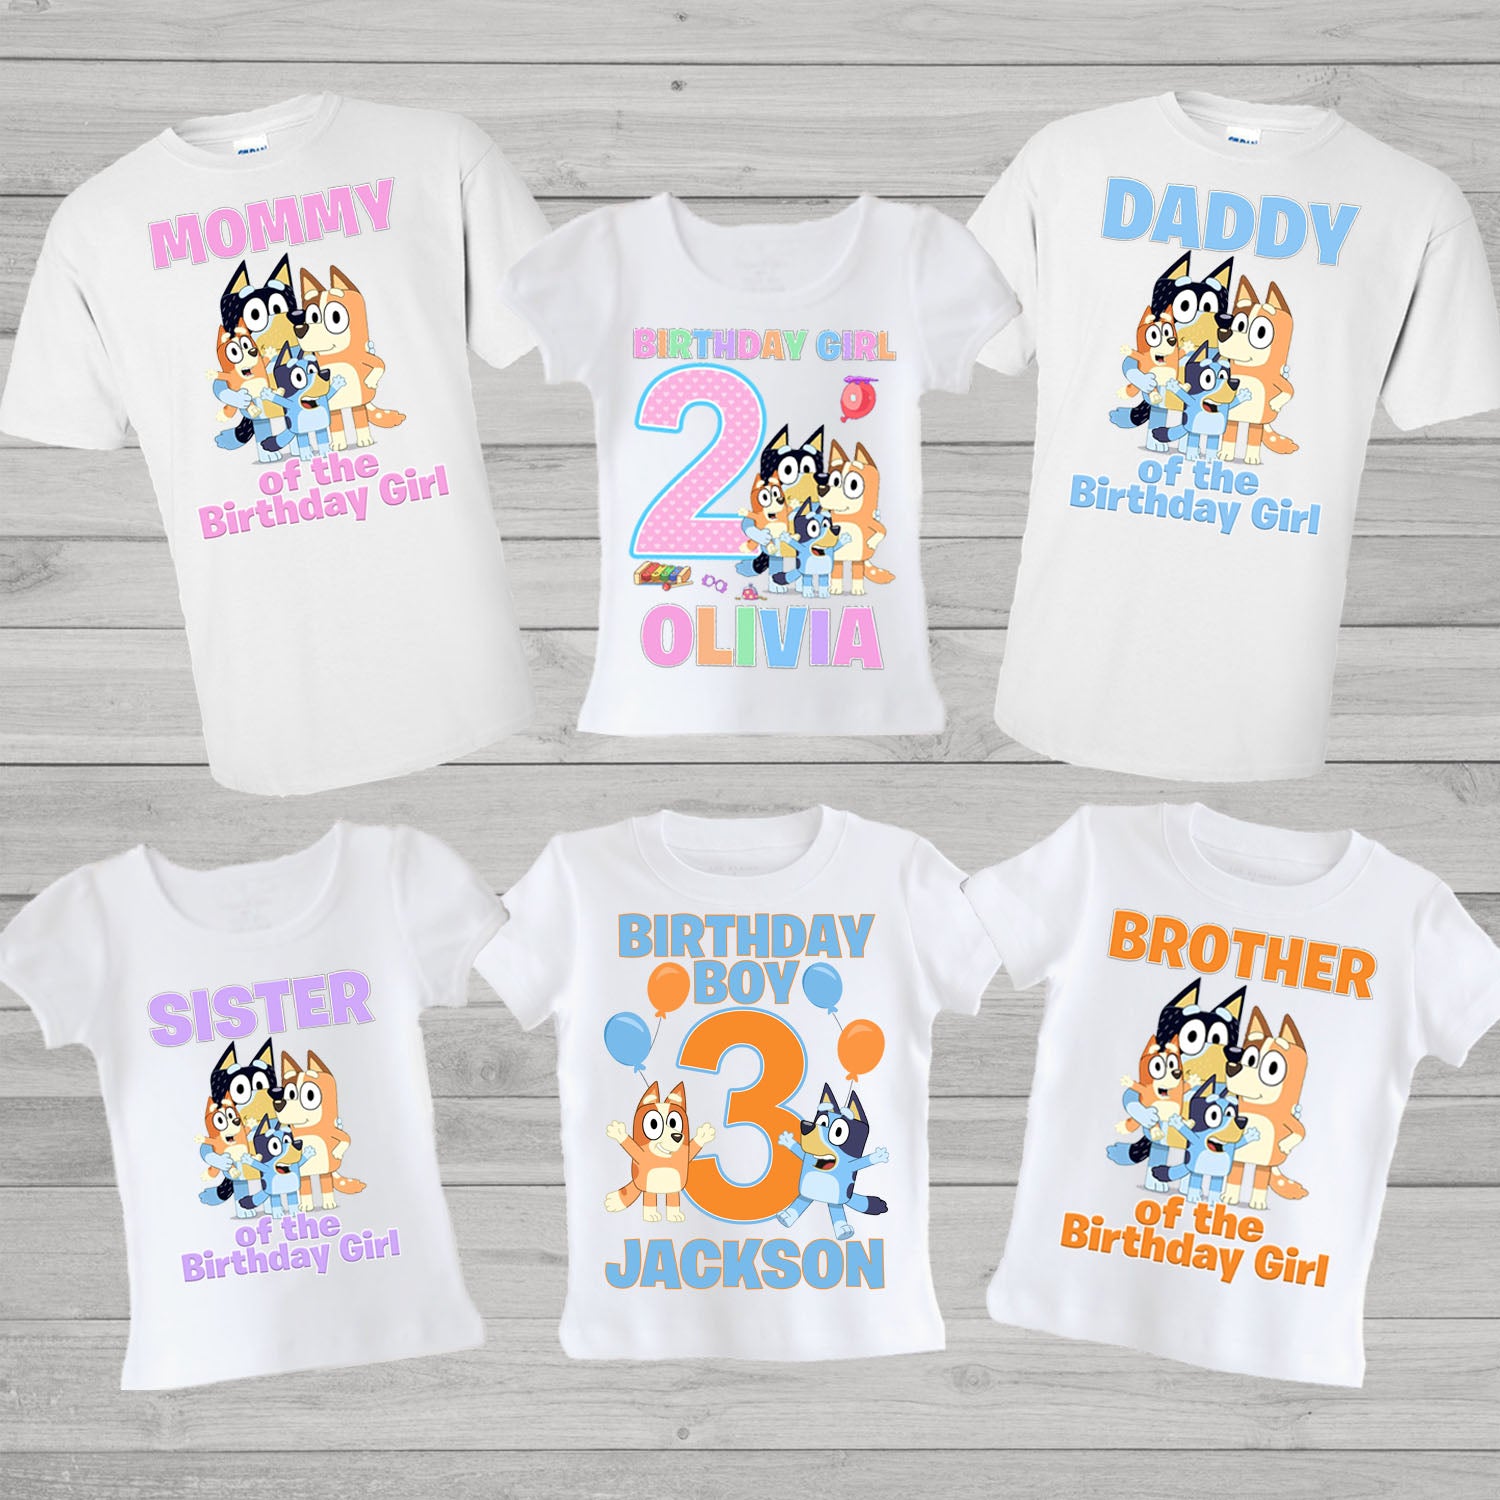 Bluey Mom & Dad Matching Family T-Shirt - Bluey Official Website